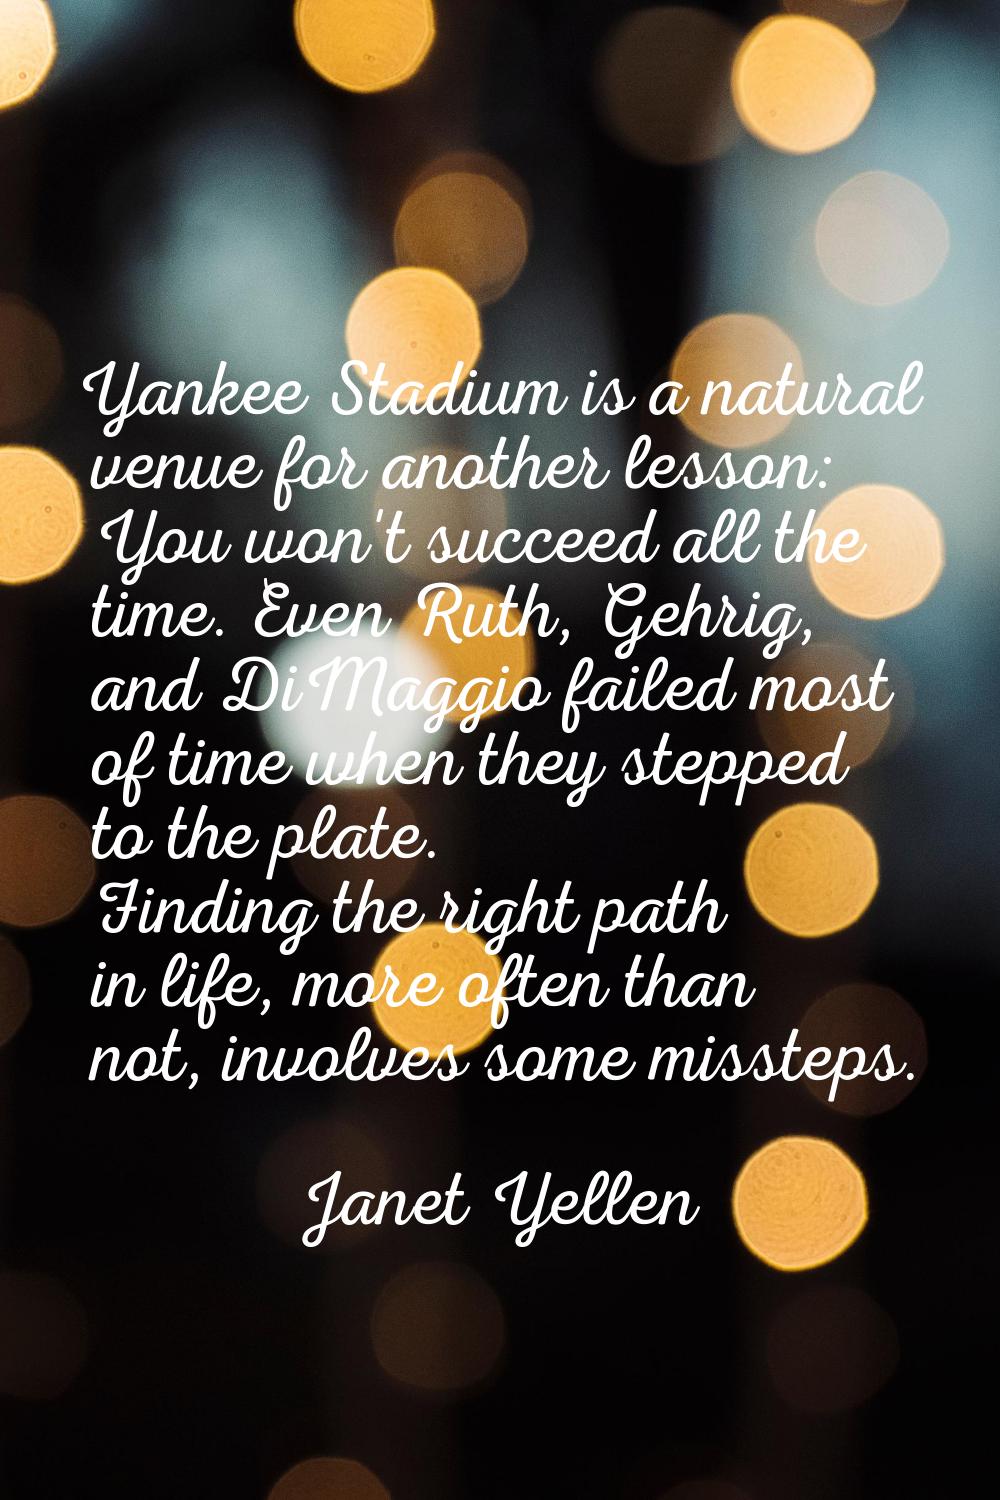 Yankee Stadium is a natural venue for another lesson: You won't succeed all the time. Even Ruth, Ge